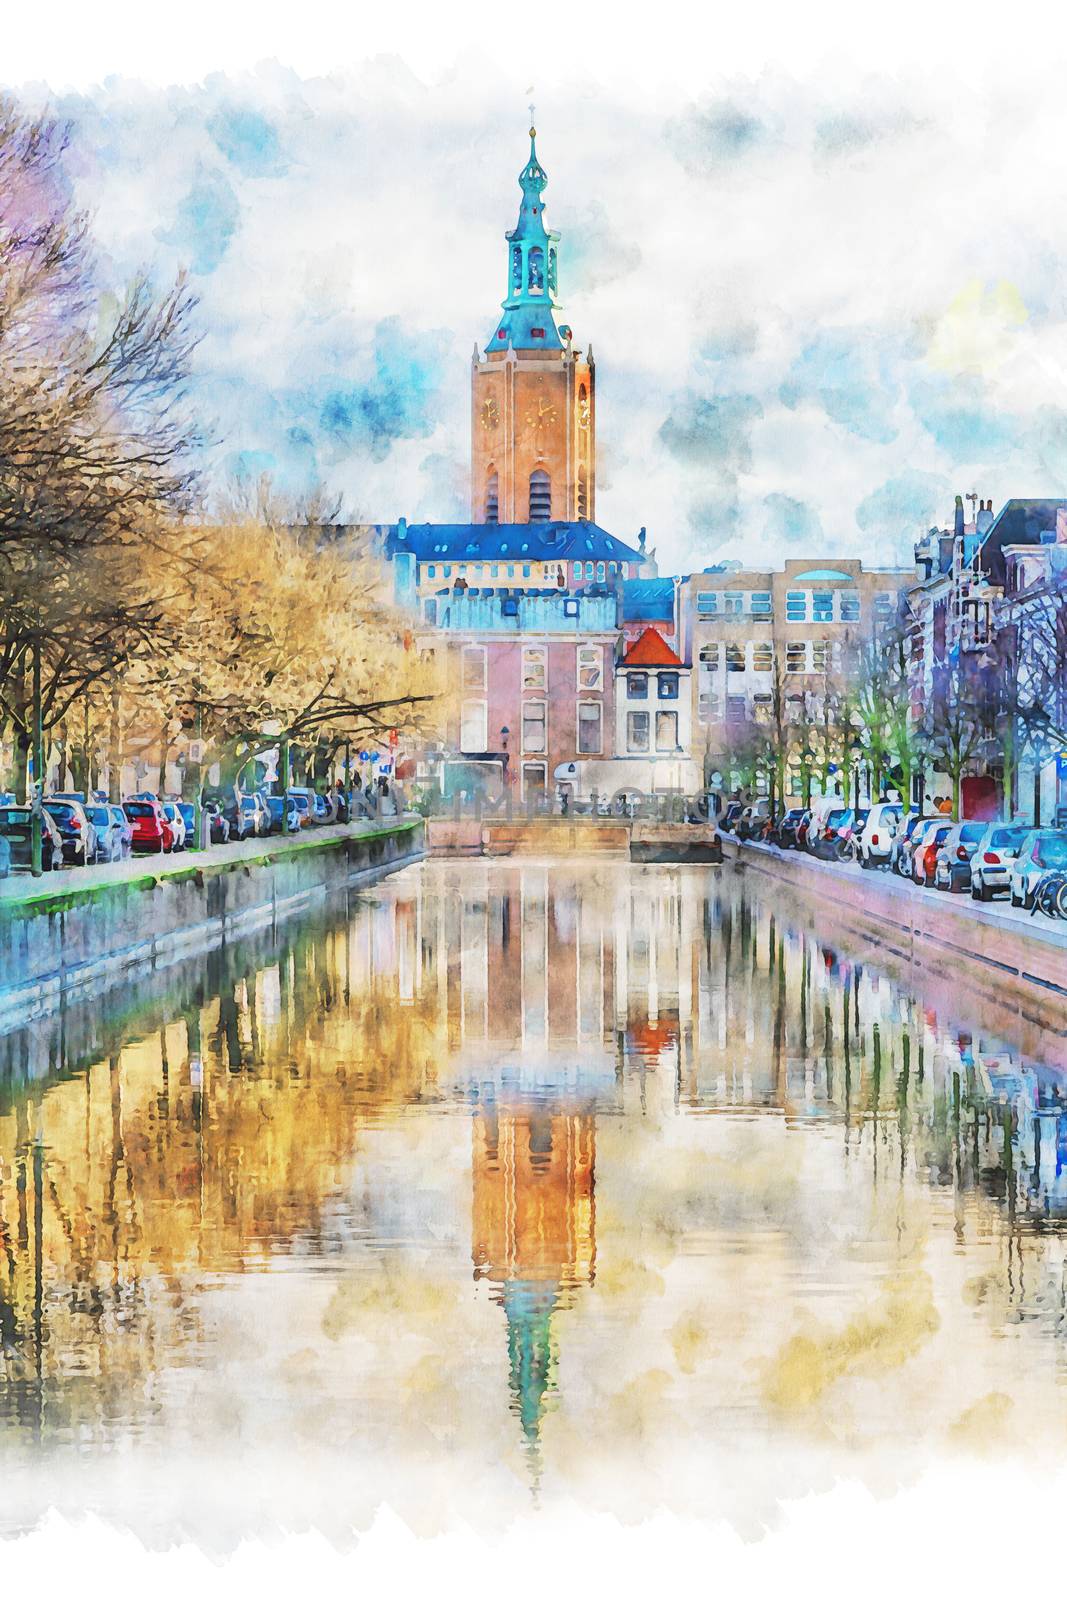 Digital watercolor painting of Saint James church reflected on the canal calm water nested to the royal stable, in The Hague, Netherlands by ankorlight